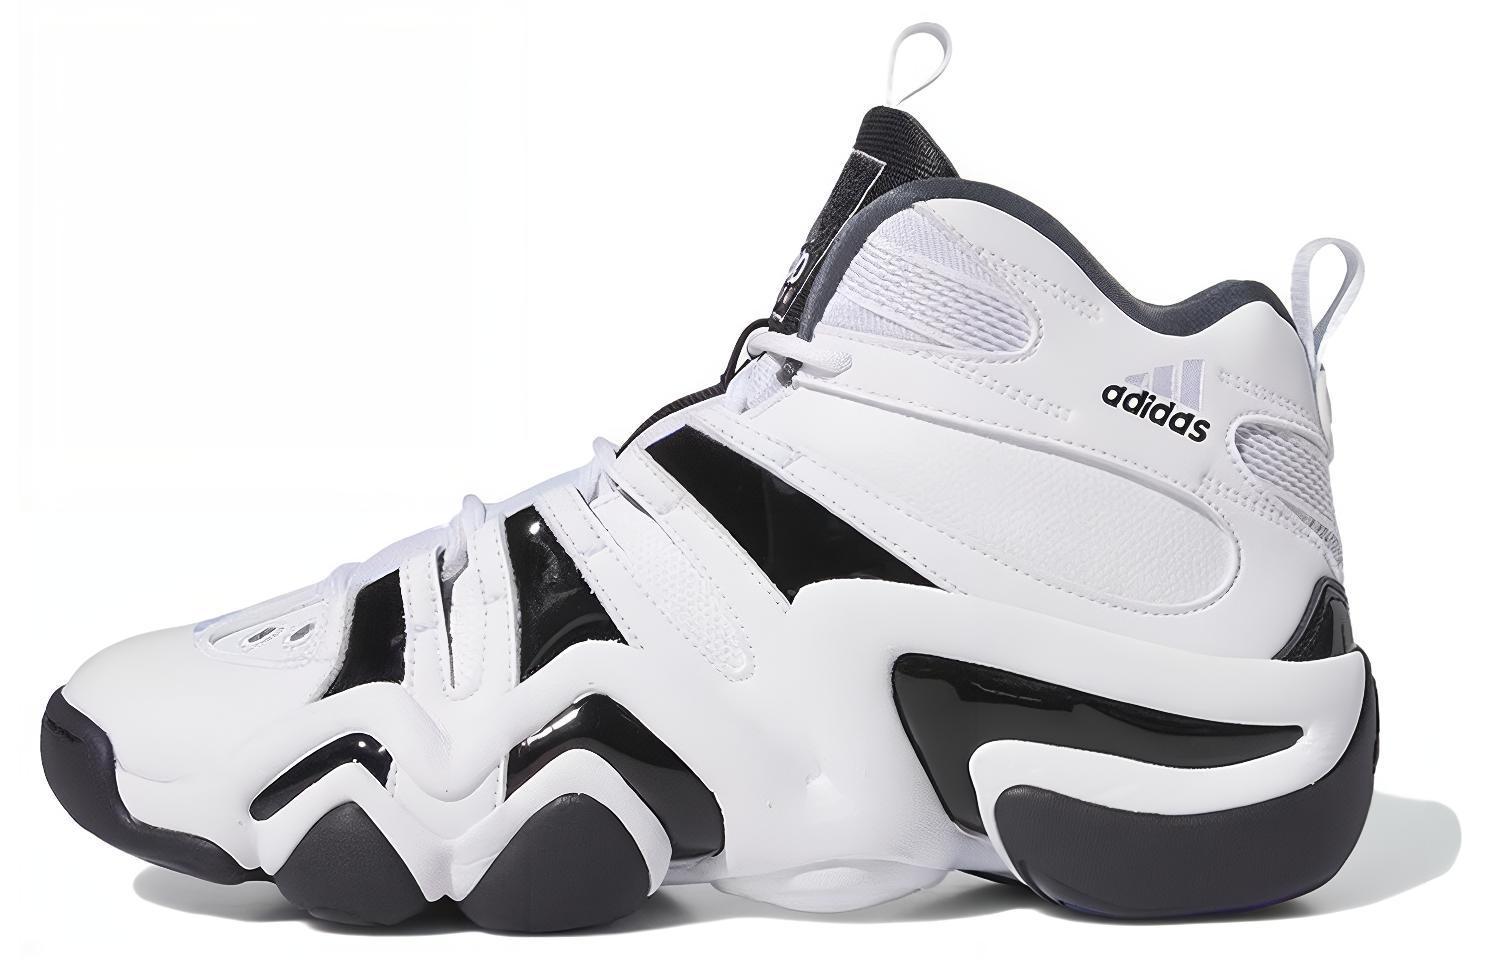 adidas Crazy 8 "30 POINT GAME"